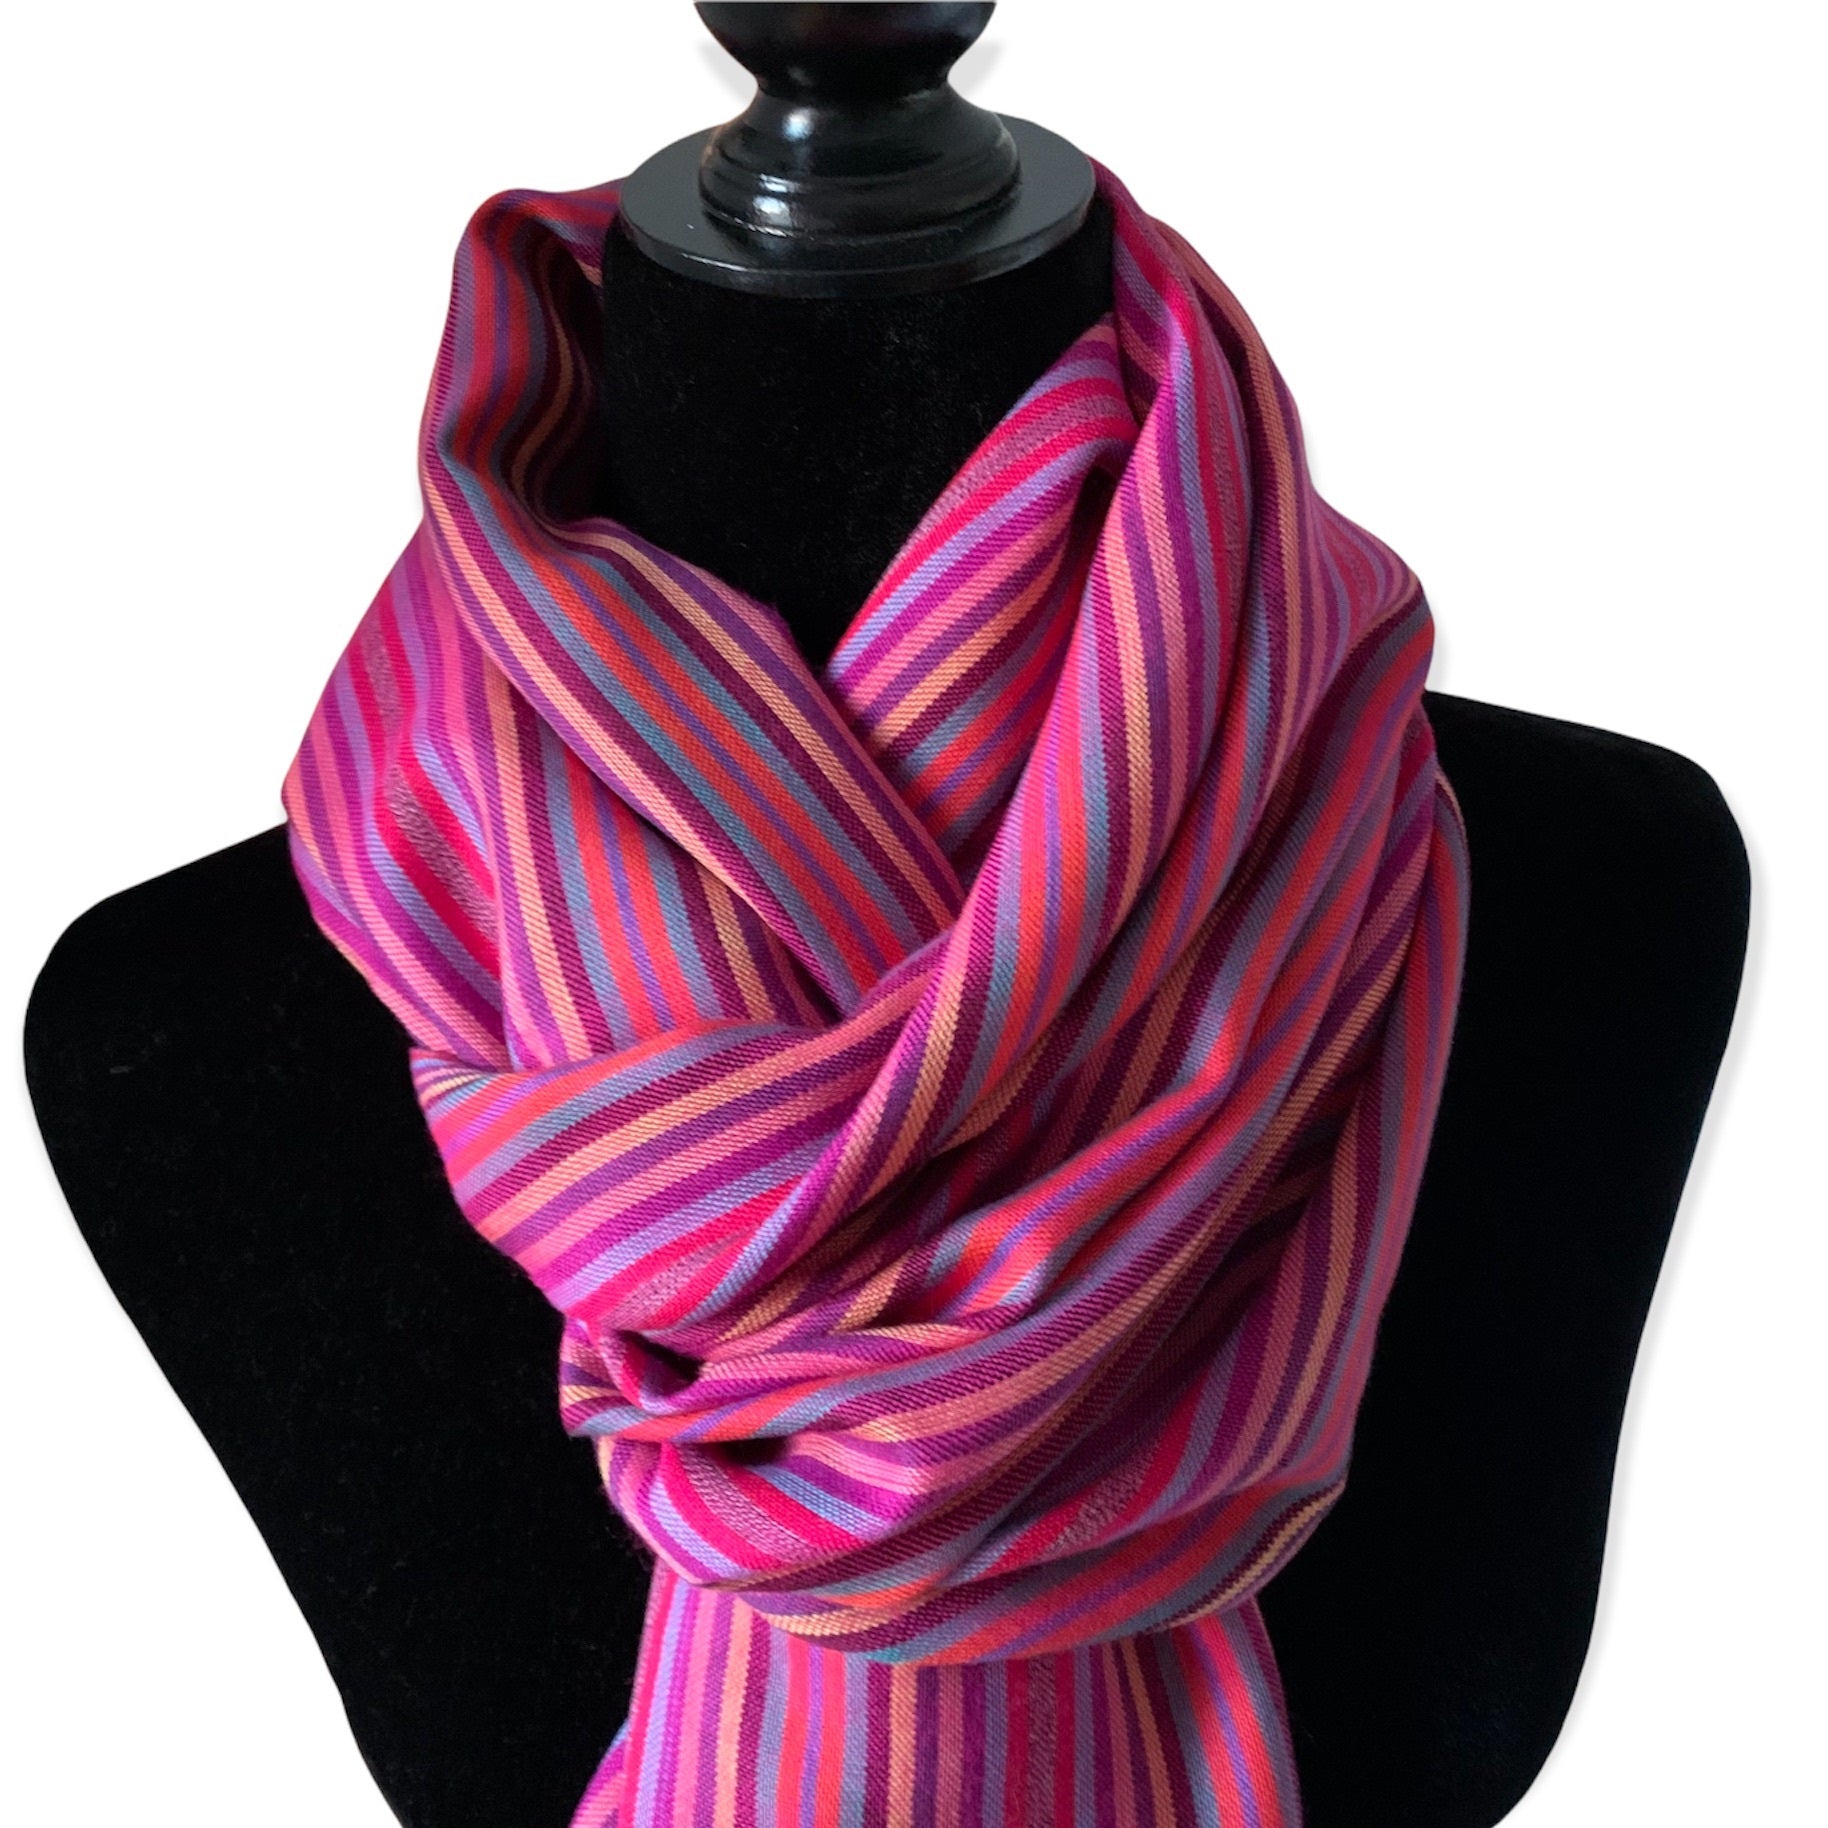 Narrow Striped Handwoven Scarf - Shades of Pink